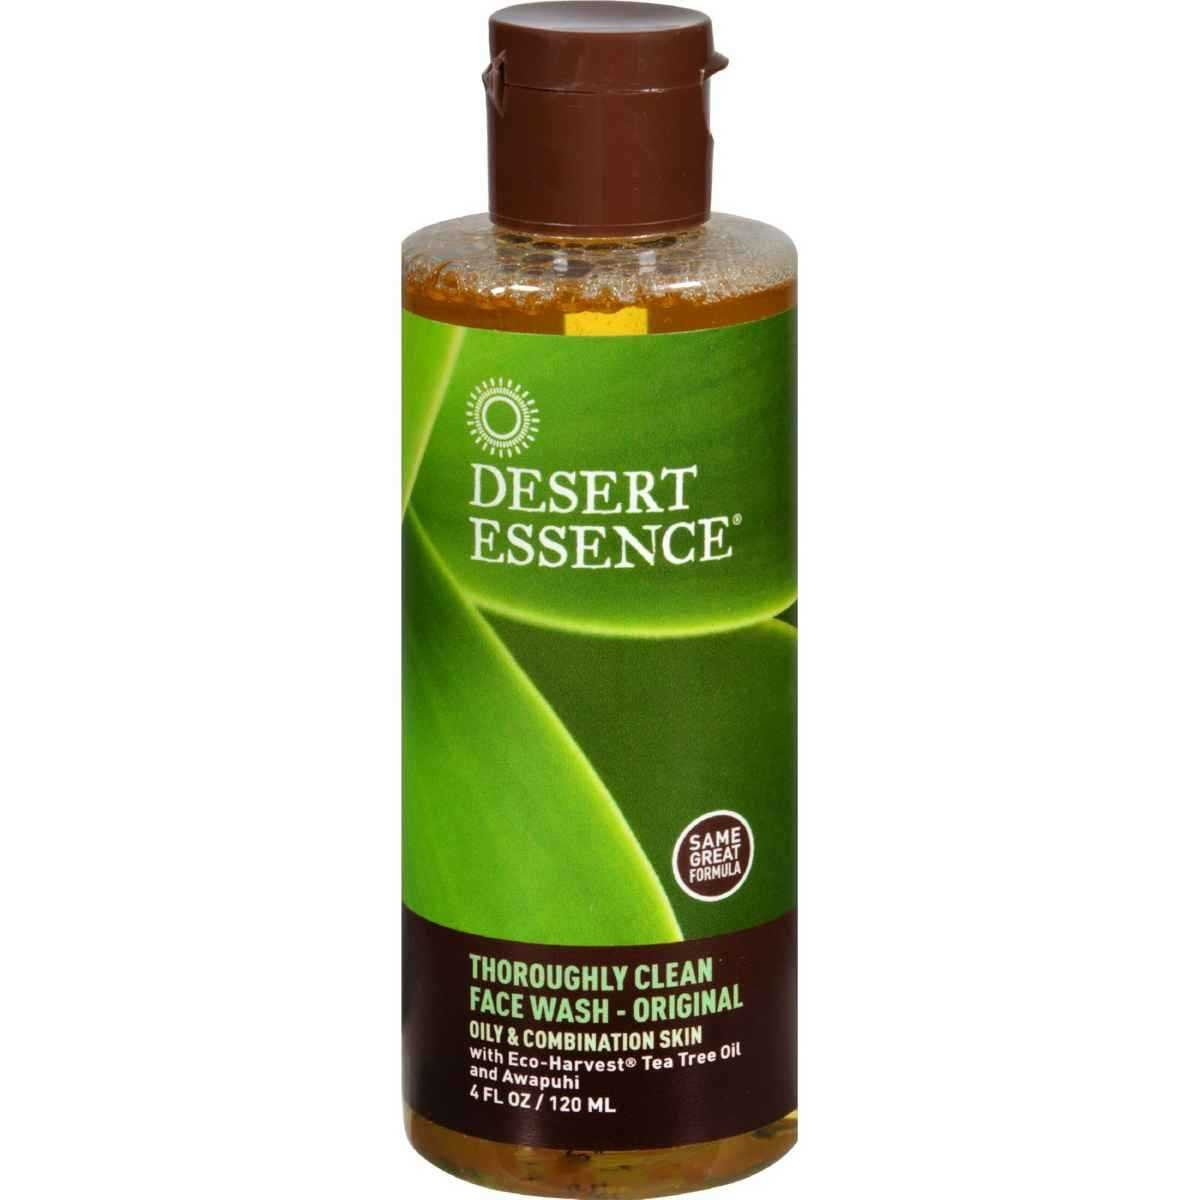 DESERT ESSENCE: Thoroughly Clean Face Wash, 4 oz - Vending Business Solutions